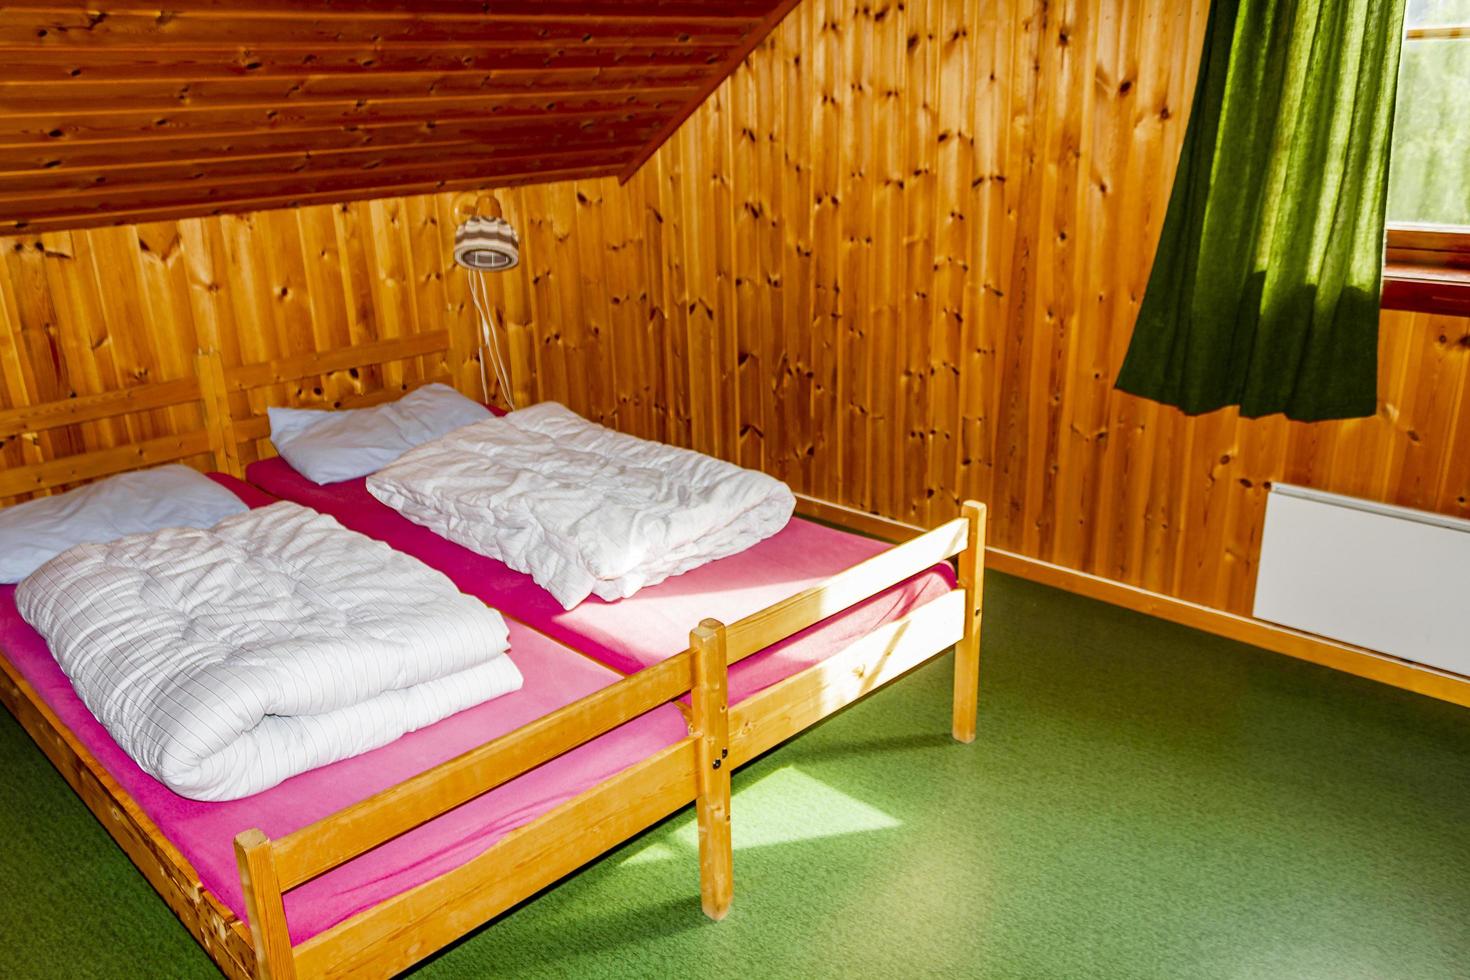 Cottage vacation interior decoration. Bedroom with beds in Norway photo